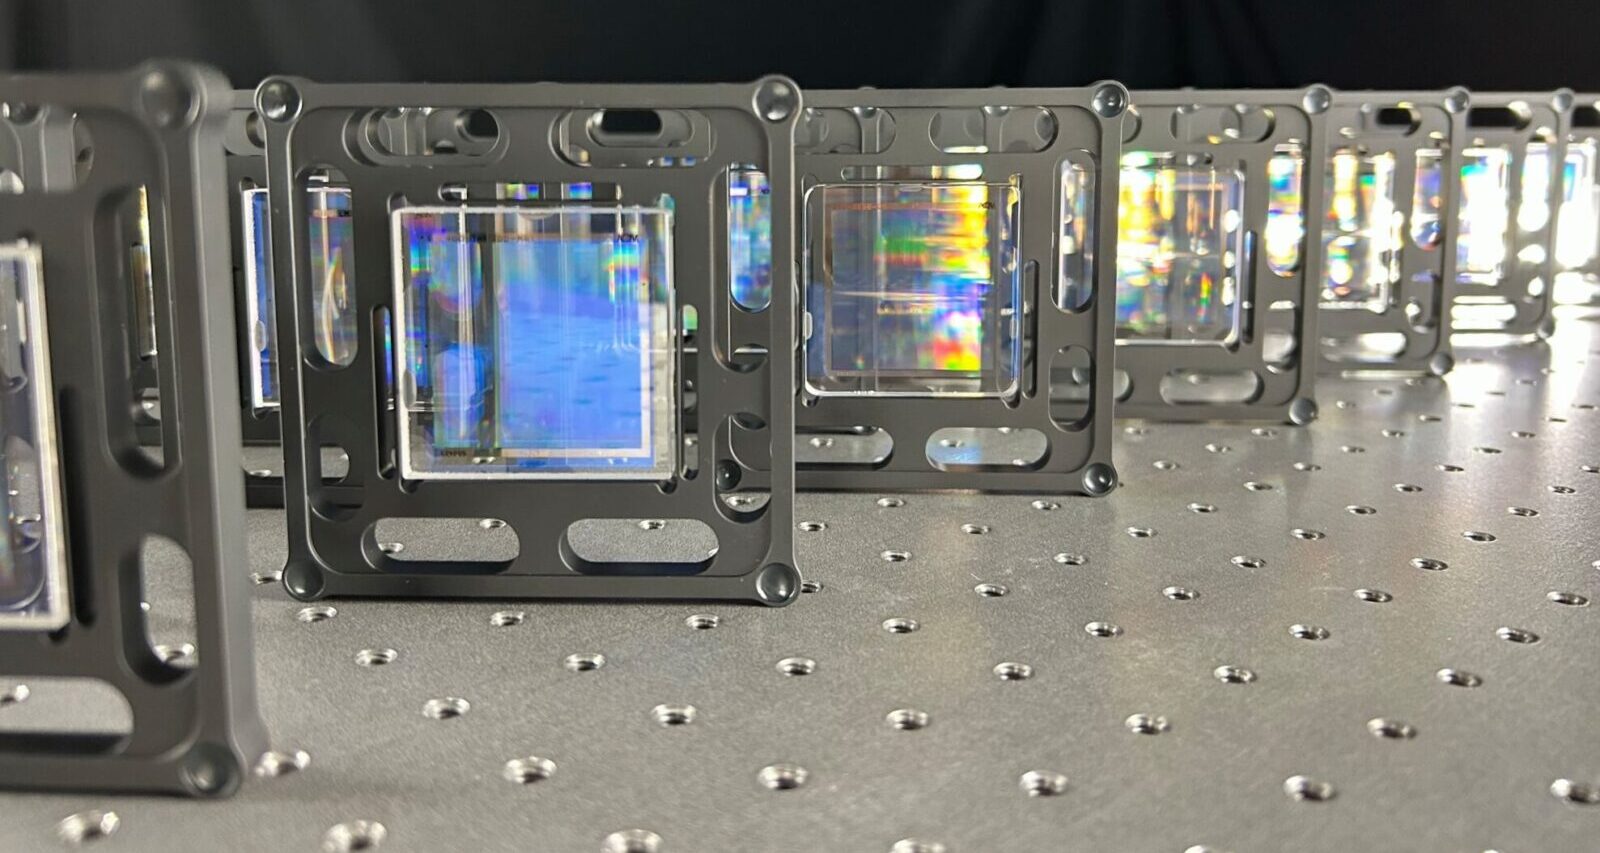 AOM computer-generated holograms (CGHs) used for measuring cylinder optics standing on a table